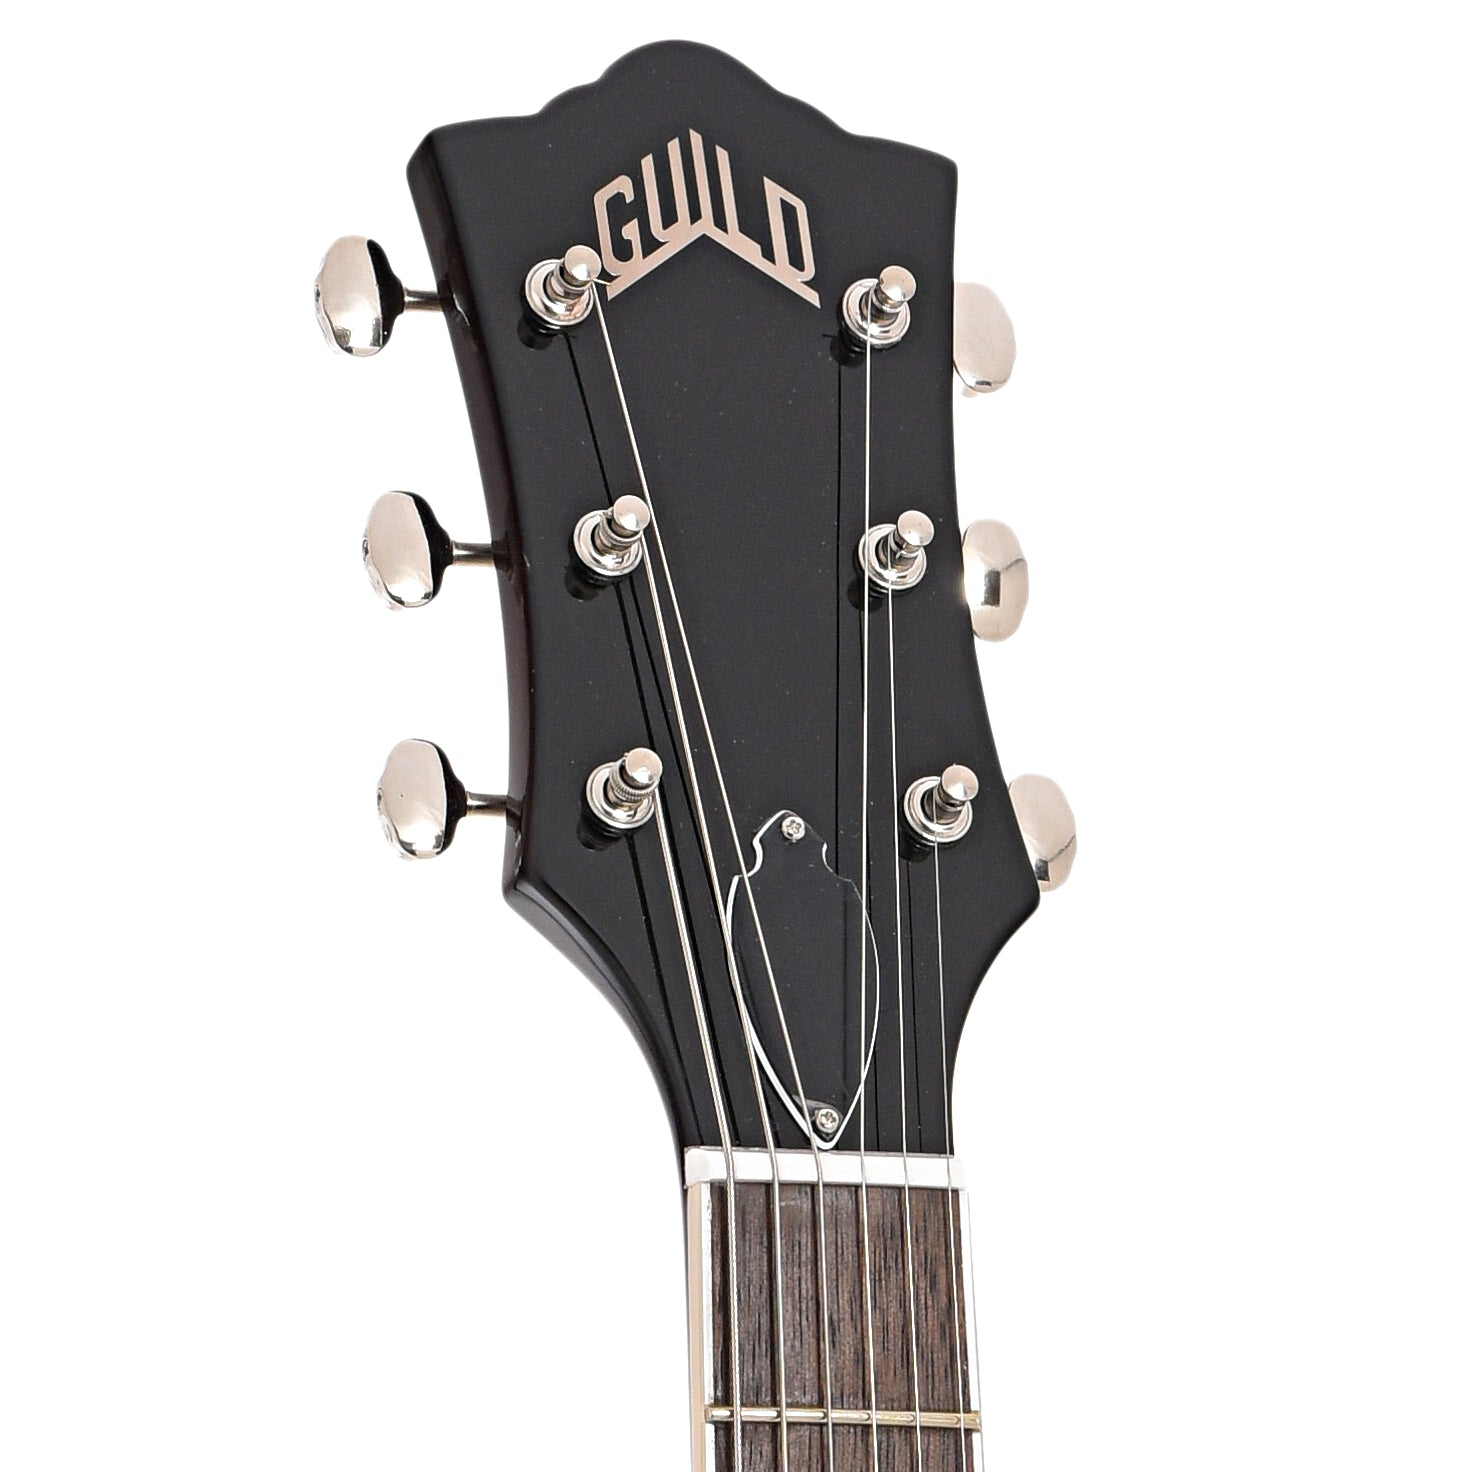 Front headstock of Guild Starfire I Double Cutaway Semi-Hollow Body Guitar with GVT, California Burst